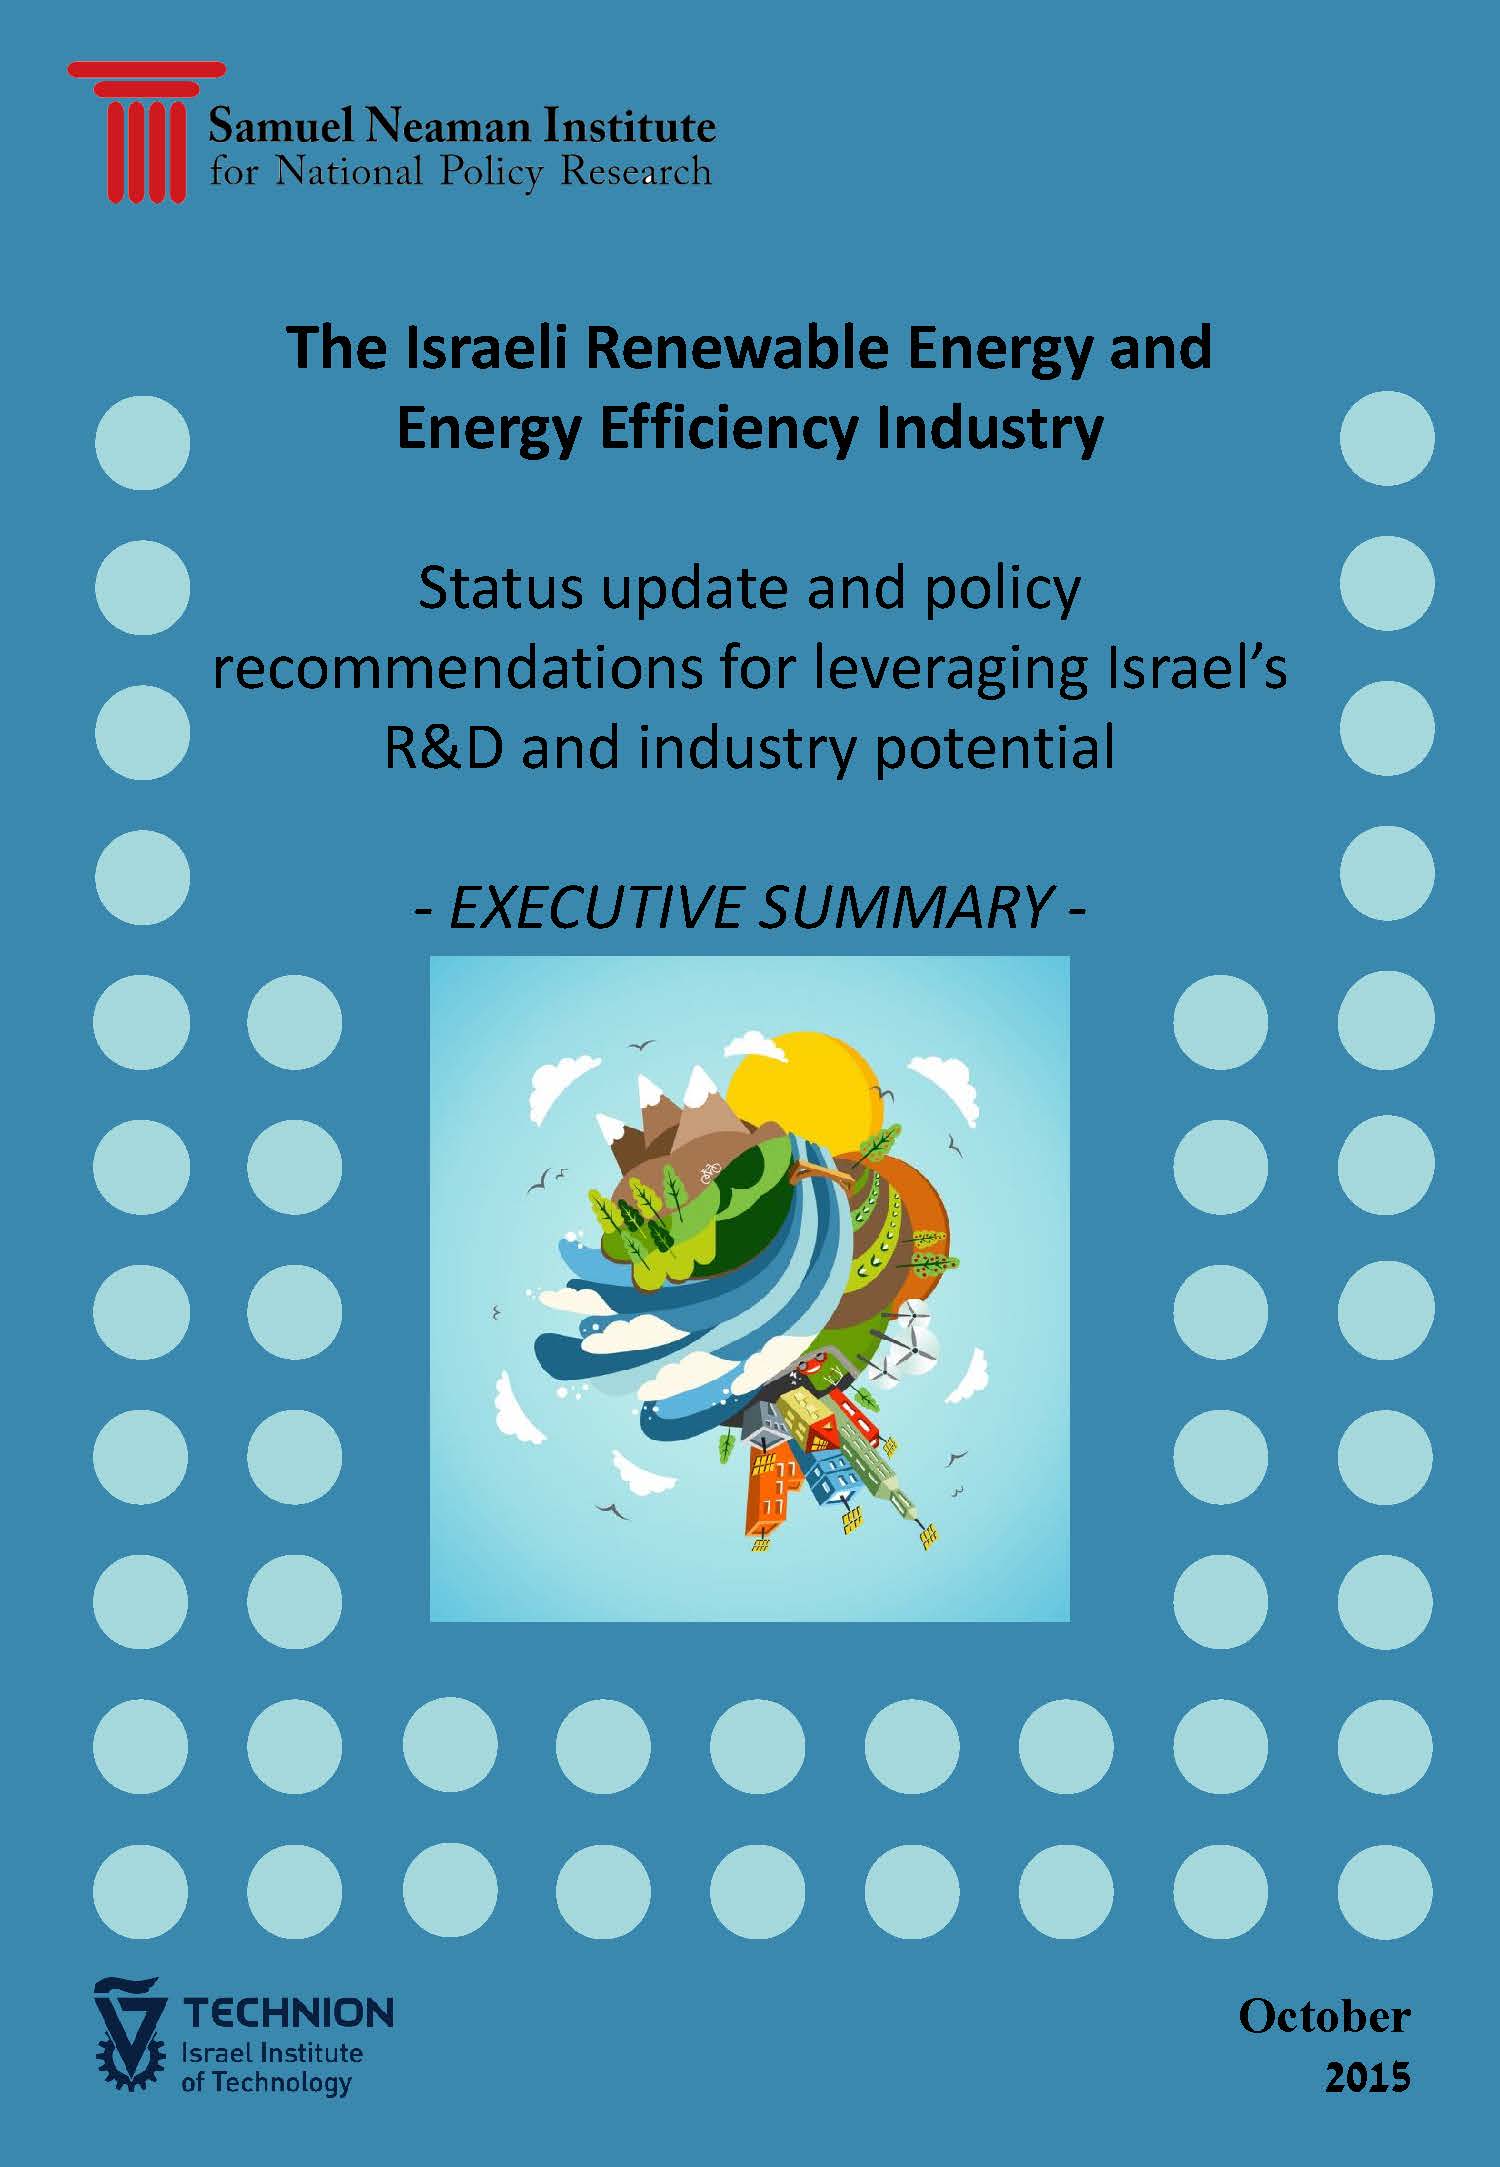 Renewable Energy and Energy Efficiency Industry in Israel Update and policy recommendations for leveraging Israeli R&D and industry - English executive summary